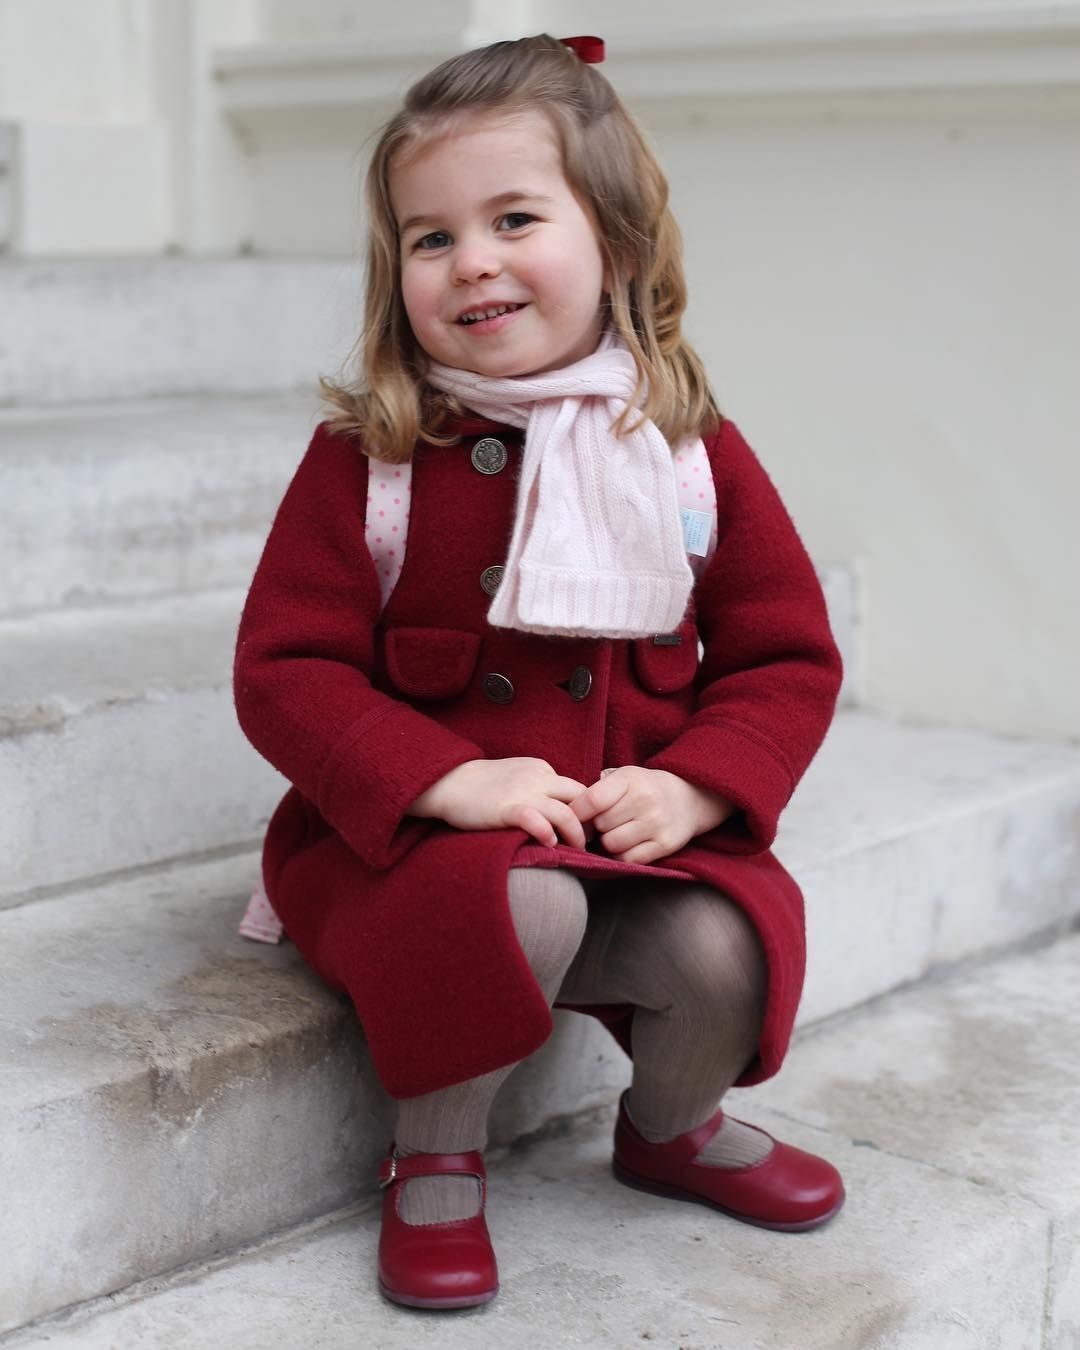 10 cute photos of the royal family taken by Kate Middleton: they are full of warmth and tenderness